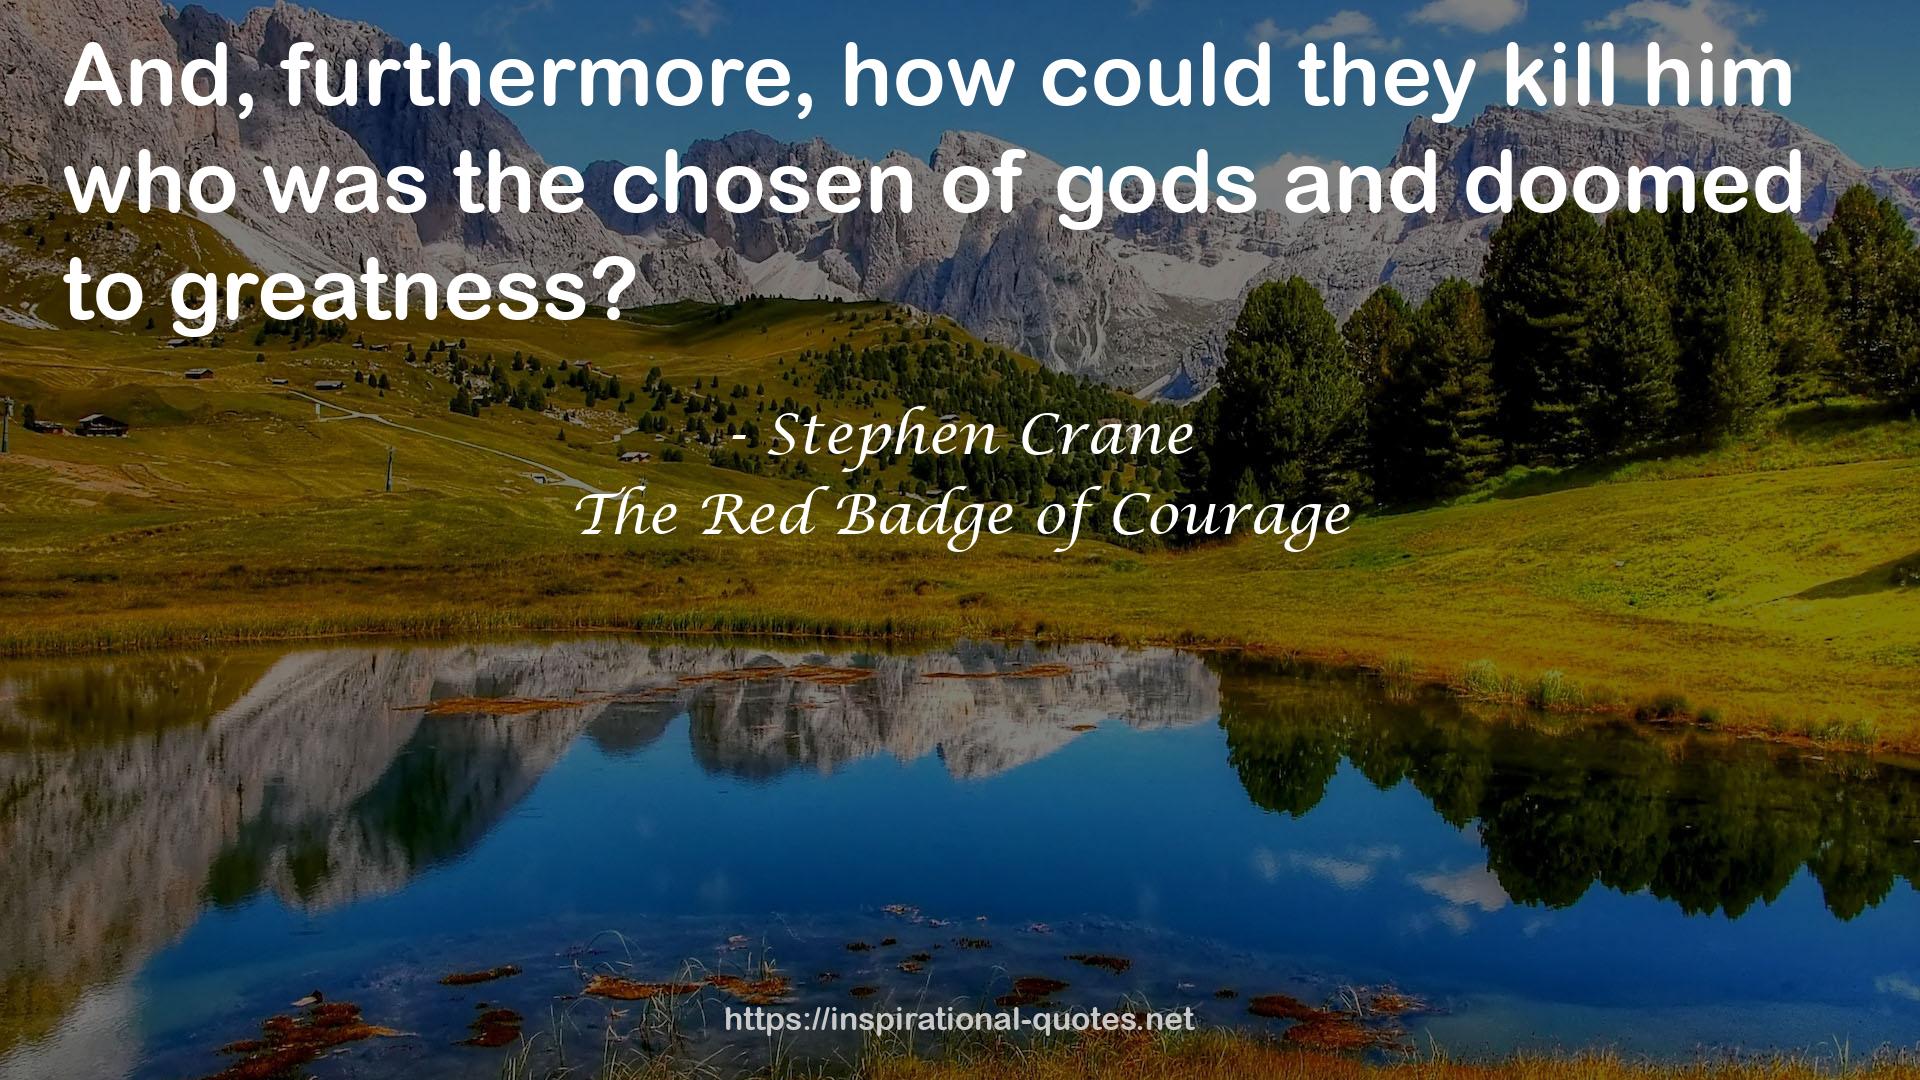 The Red Badge of Courage QUOTES